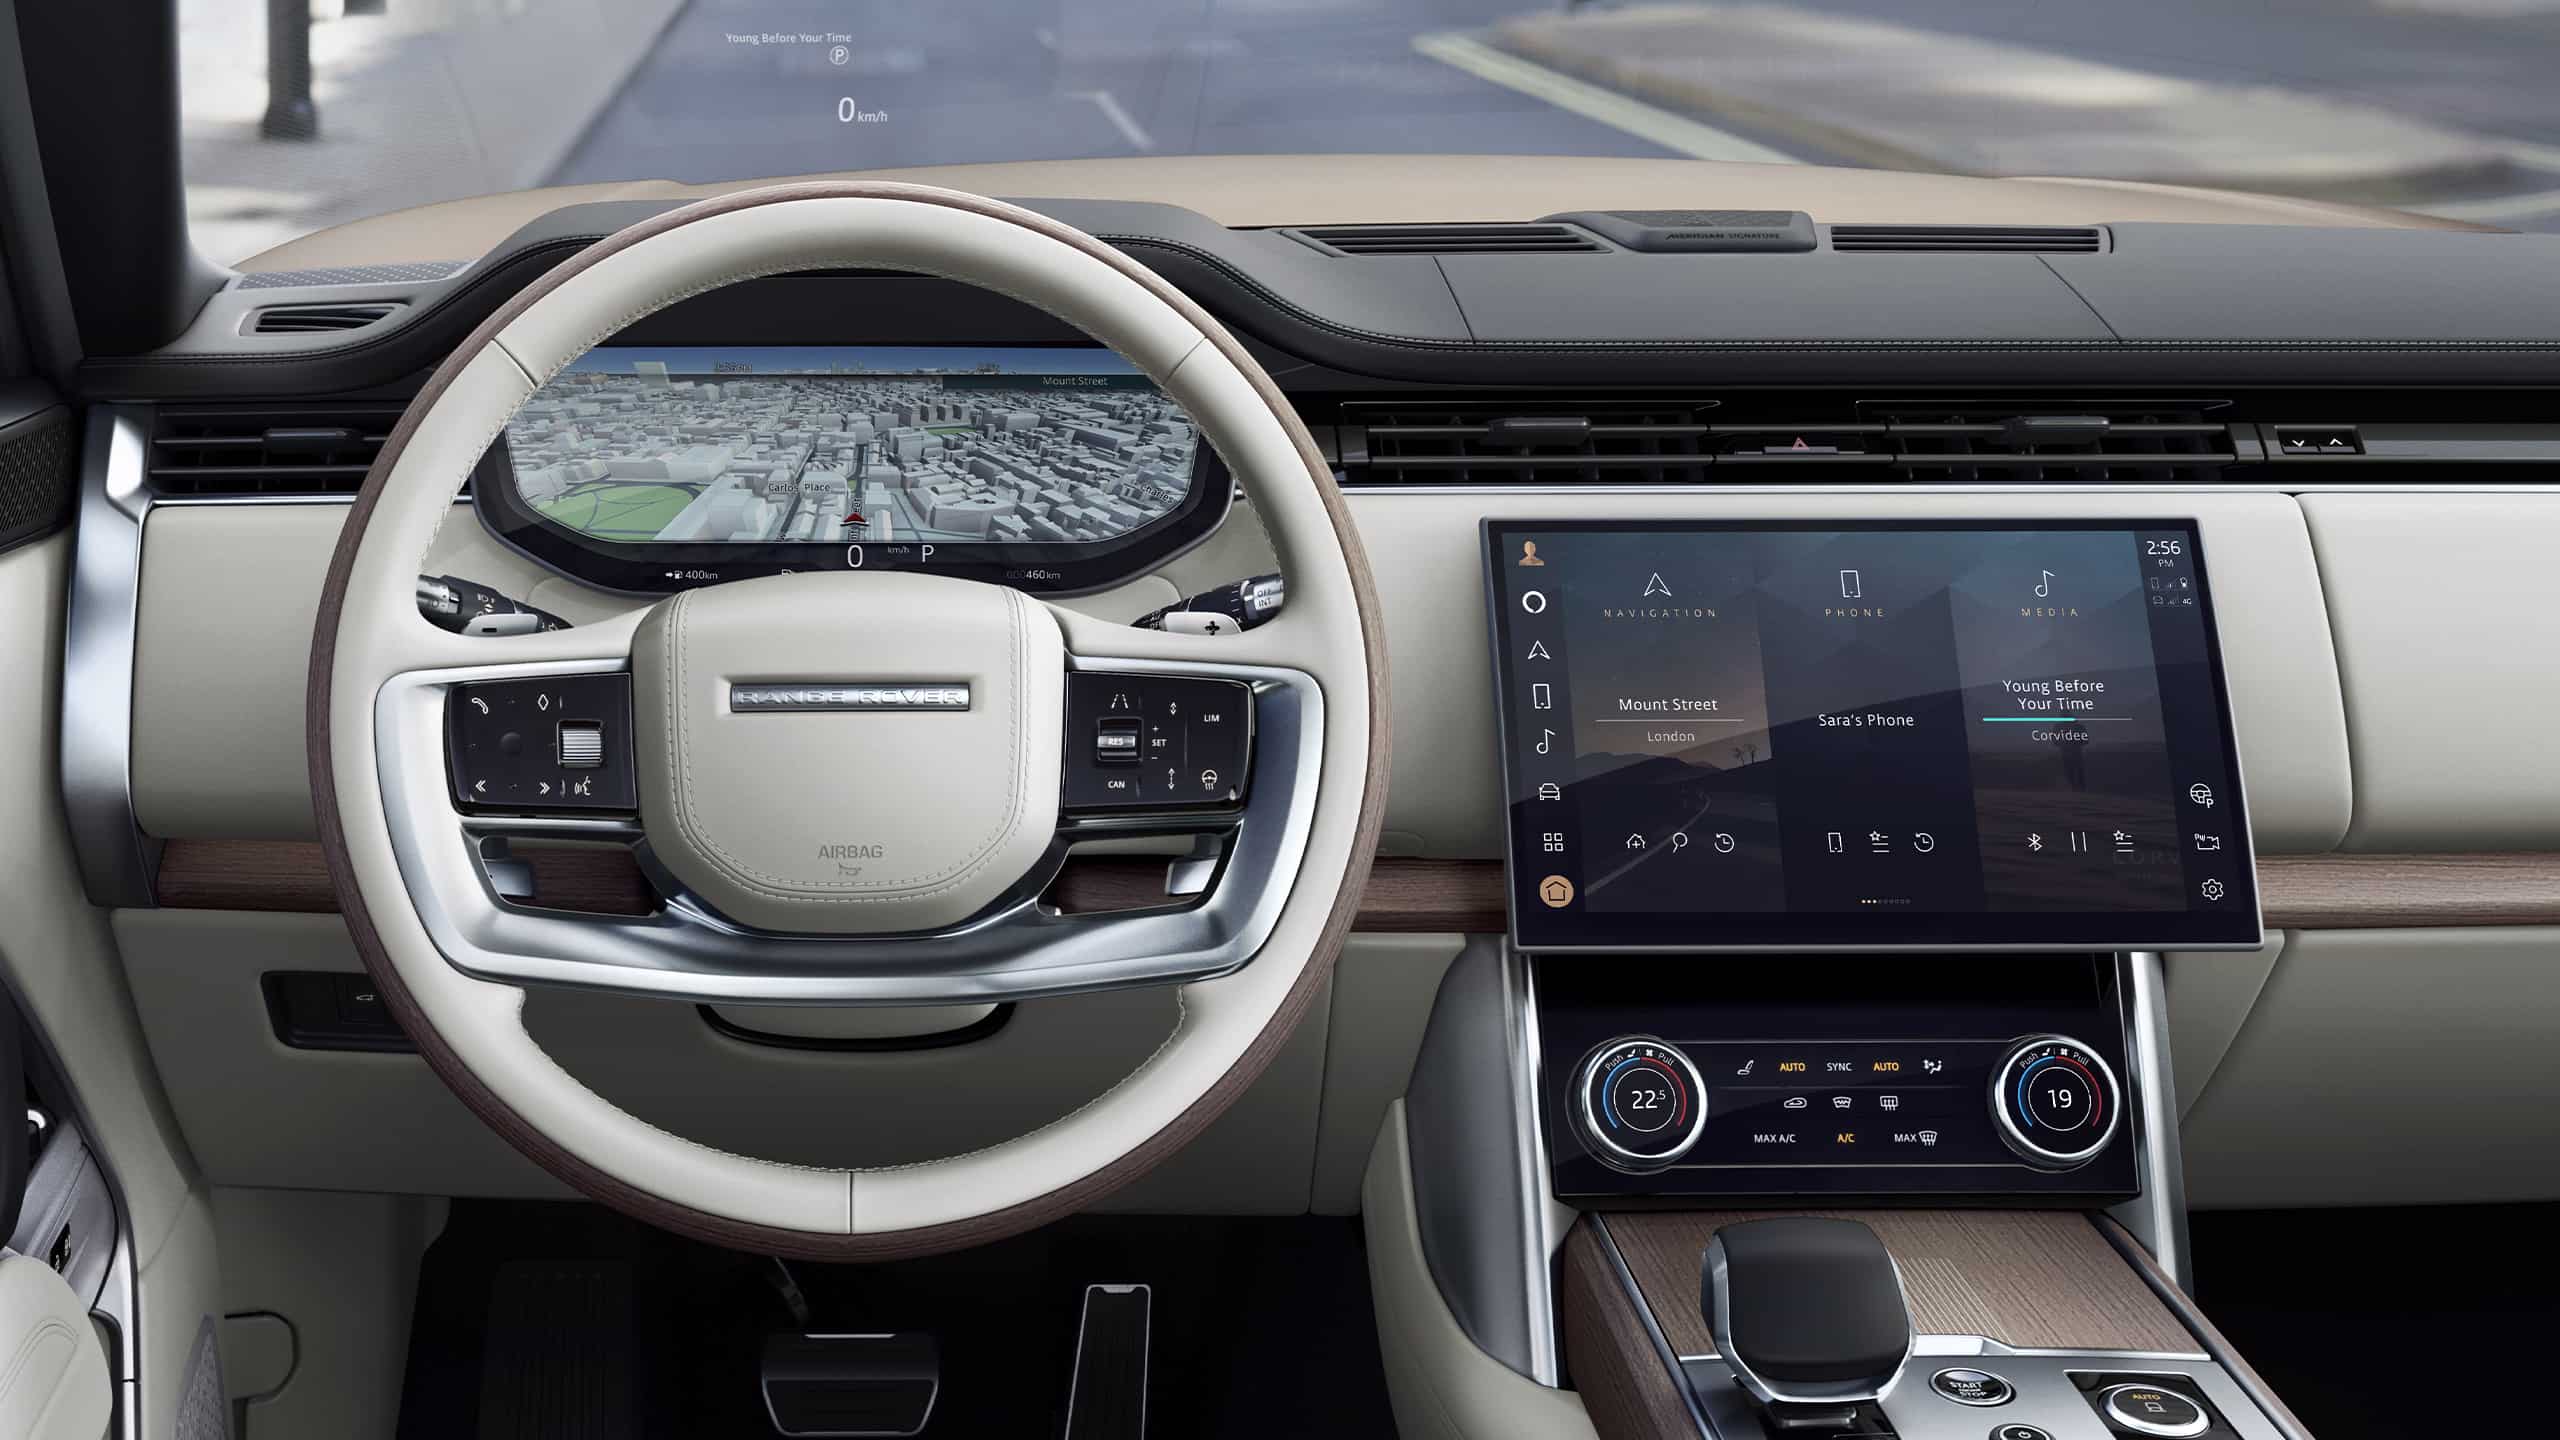 View of steering wheel and infotainment system